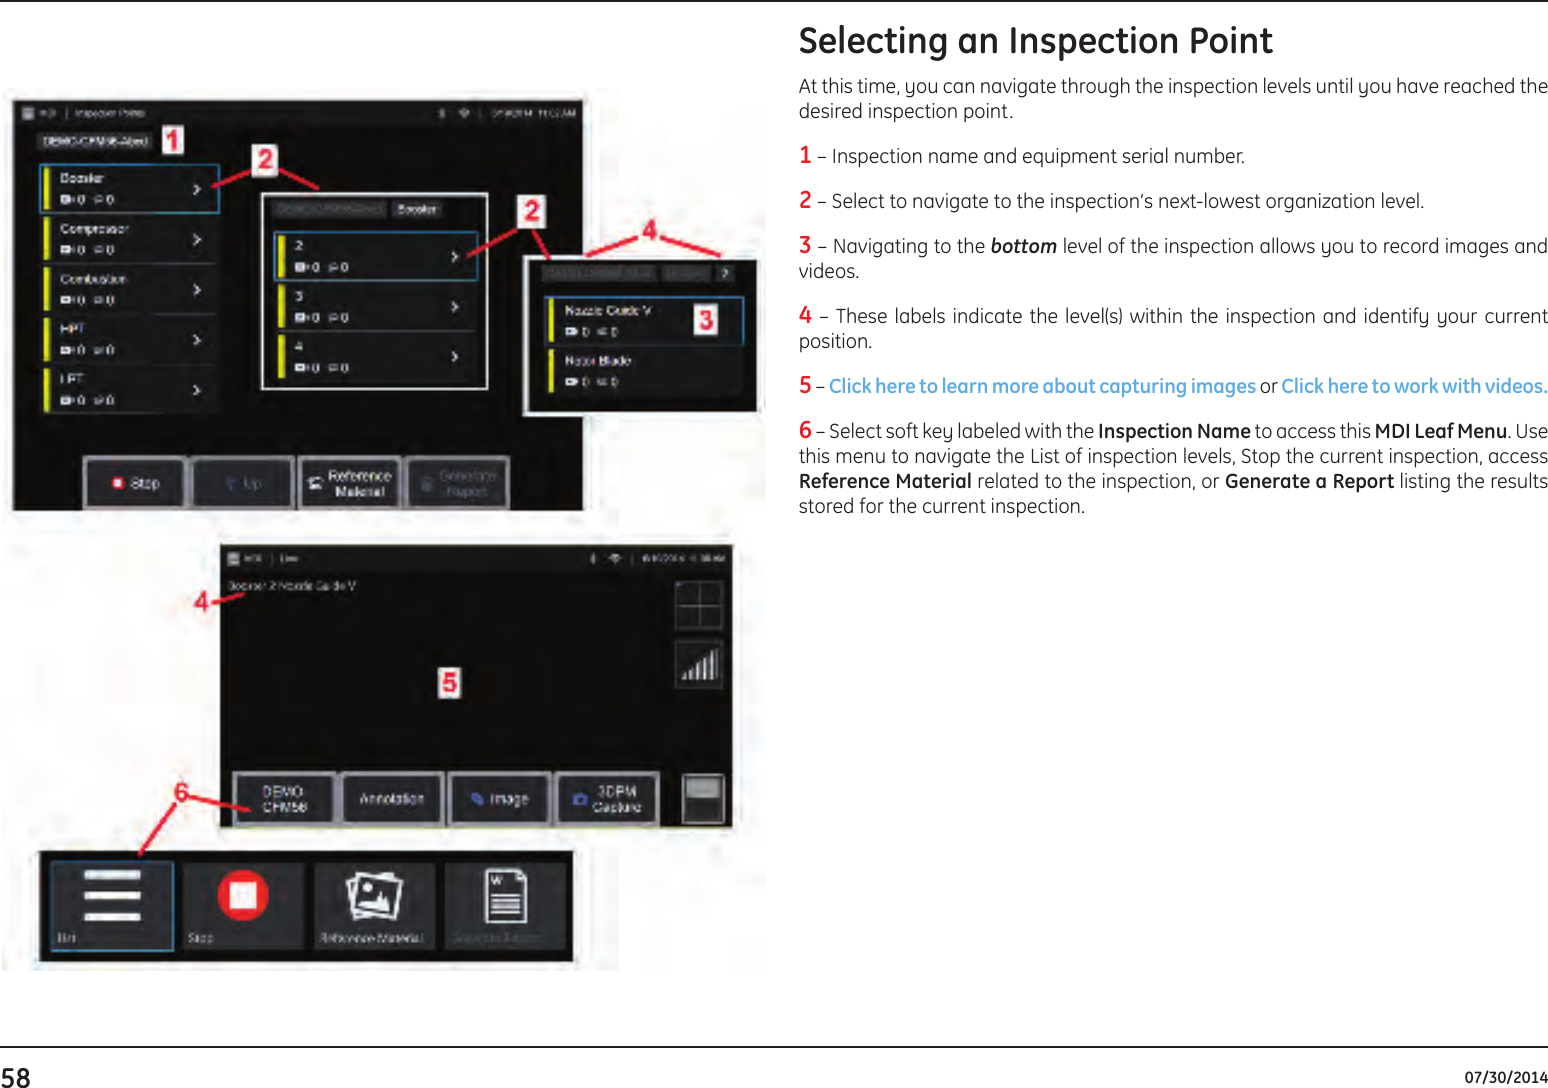 58 07/30/2014Selecting an Inspection PointAt this time, you can navigate through the inspection levels until you have reached the desired inspection point.1 – Inspection name and equipment serial number.2 – Select to navigate to the inspection’s next-lowest organization level.3 – Navigating to the bottom level of the inspection allows you to record images and videos.4 – These labels indicate the level(s) within the inspection and identify your current position.5 – Click here to learn more about capturing images or Click here to work with videos. 6 – Select soft key labeled with the Inspection Name to access this MDI Leaf Menu. Use this menu to navigate the List of inspection levels, Stop the current inspection, access Reference Material related to the inspection, or Generate a Report listing the results stored for the current inspection.  